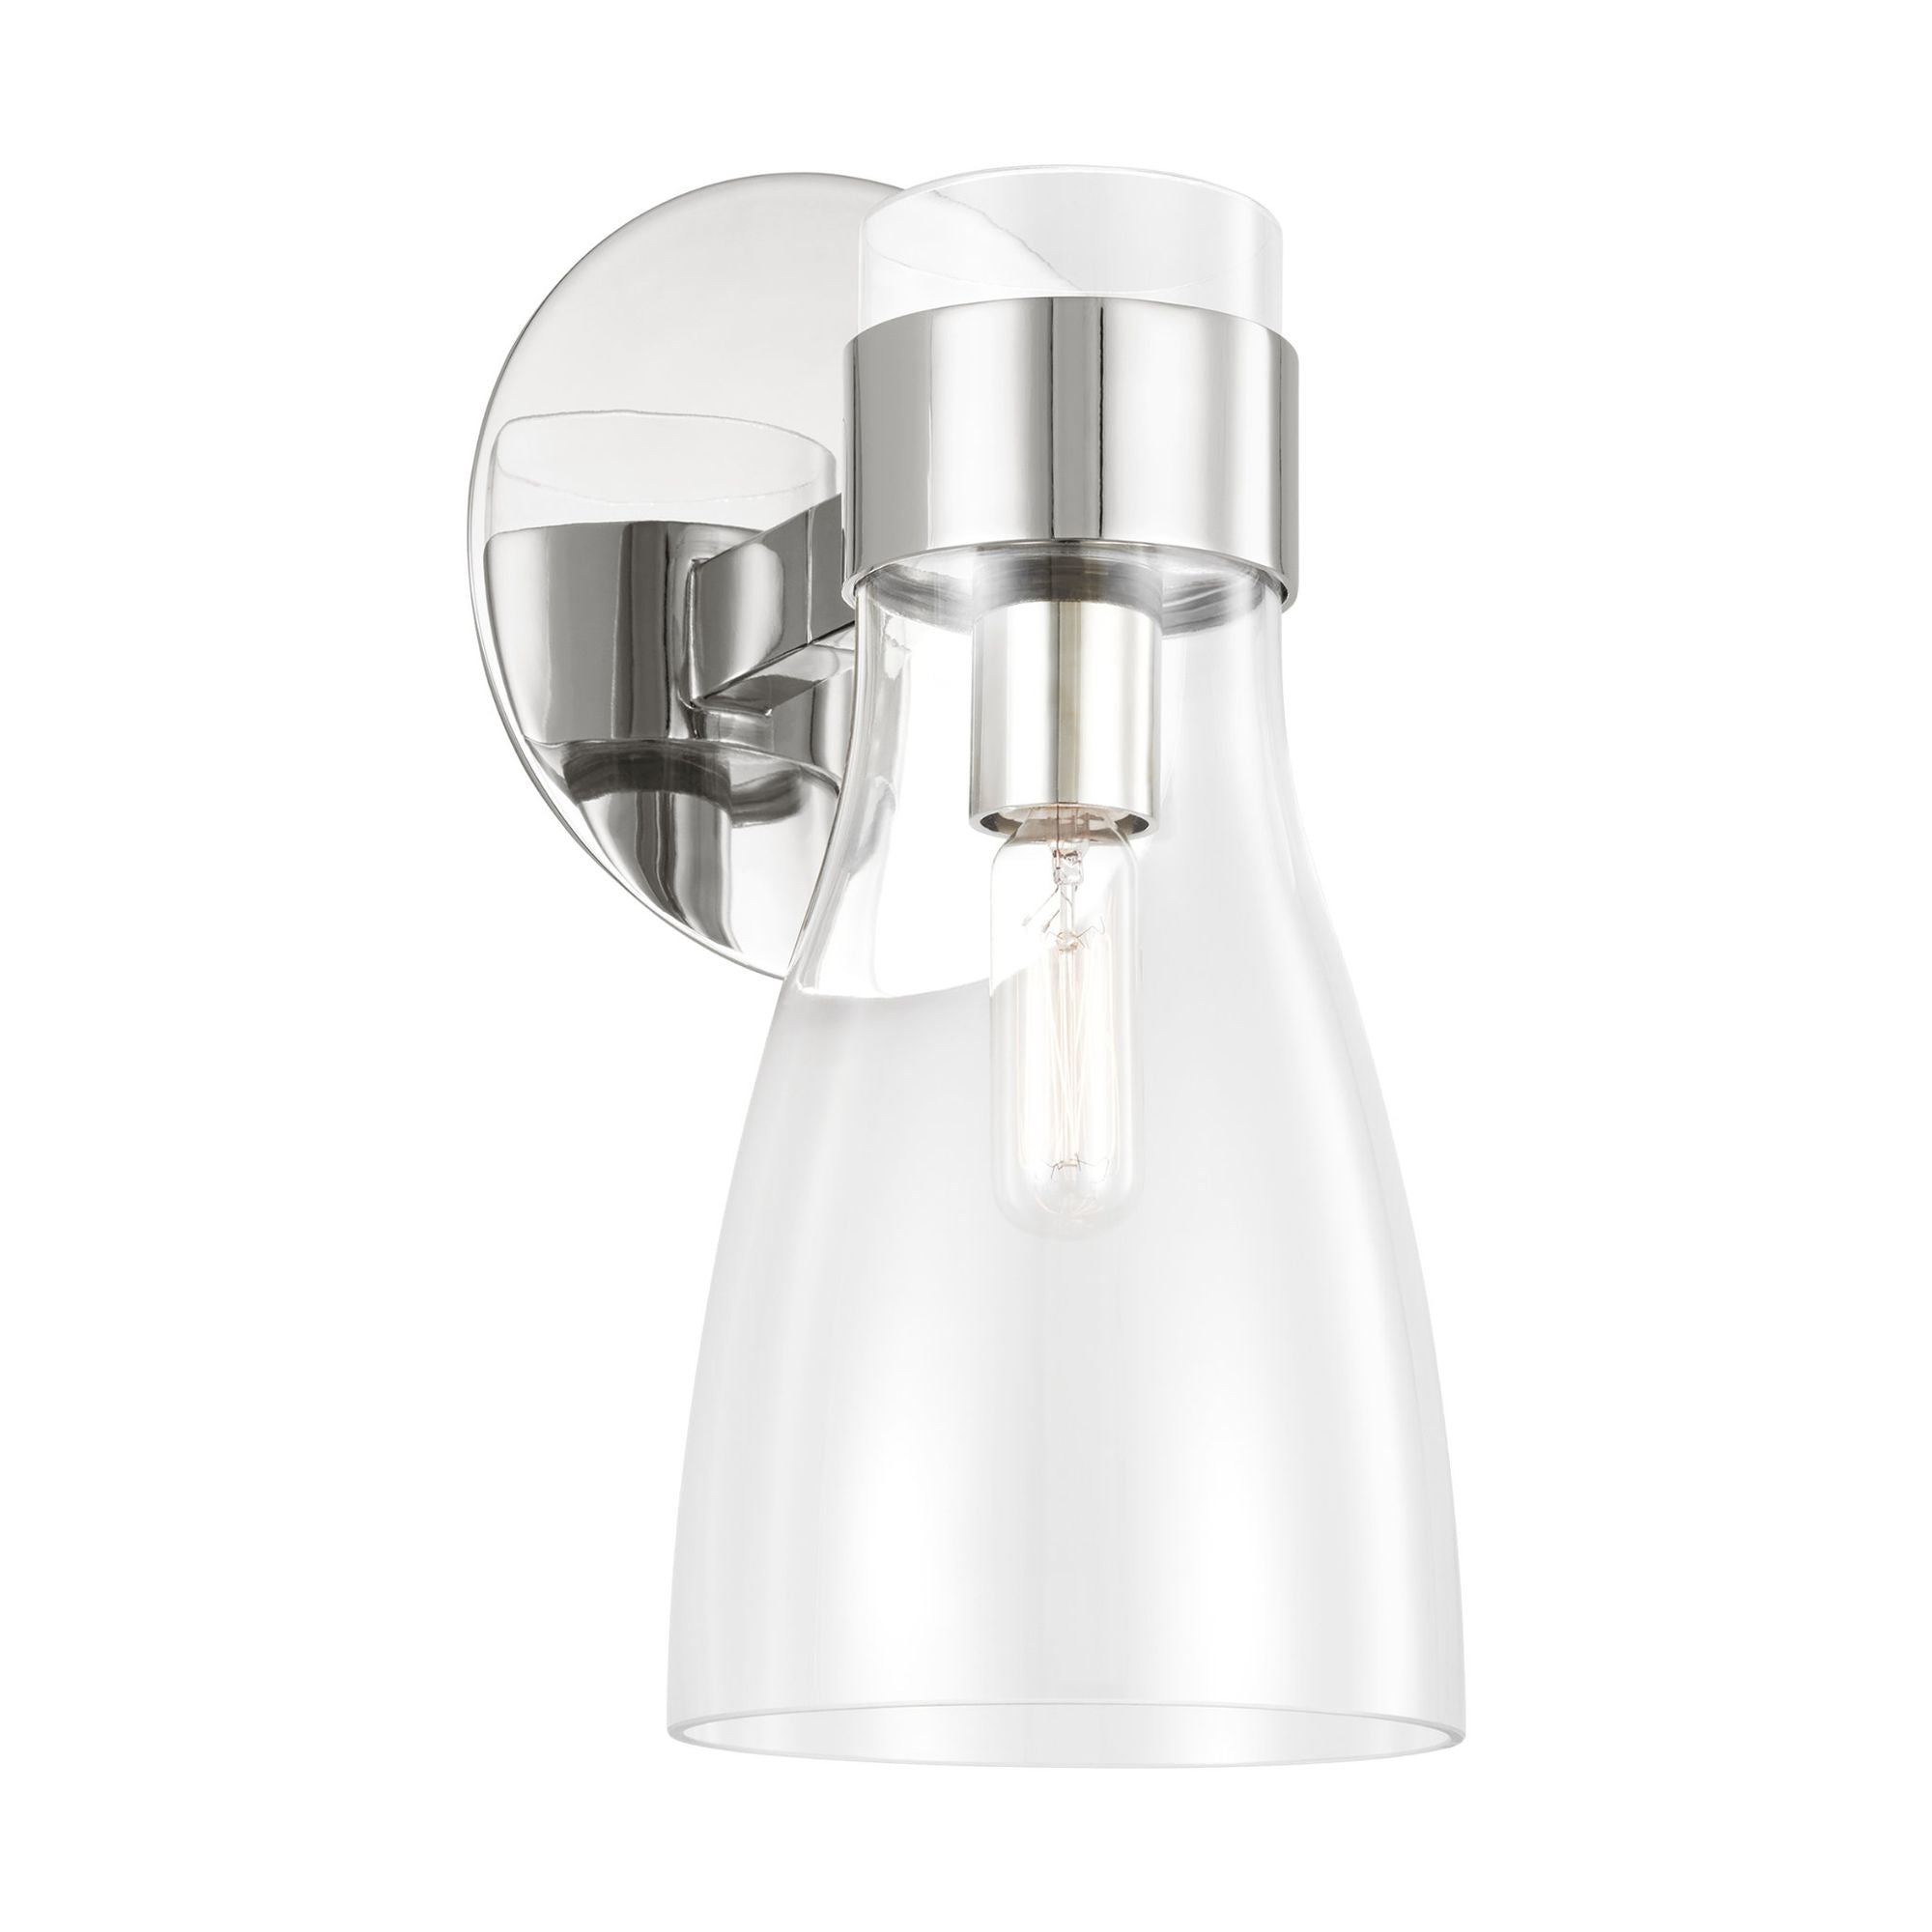 AERIN Moritz One Light Sconce in Polished Nickel